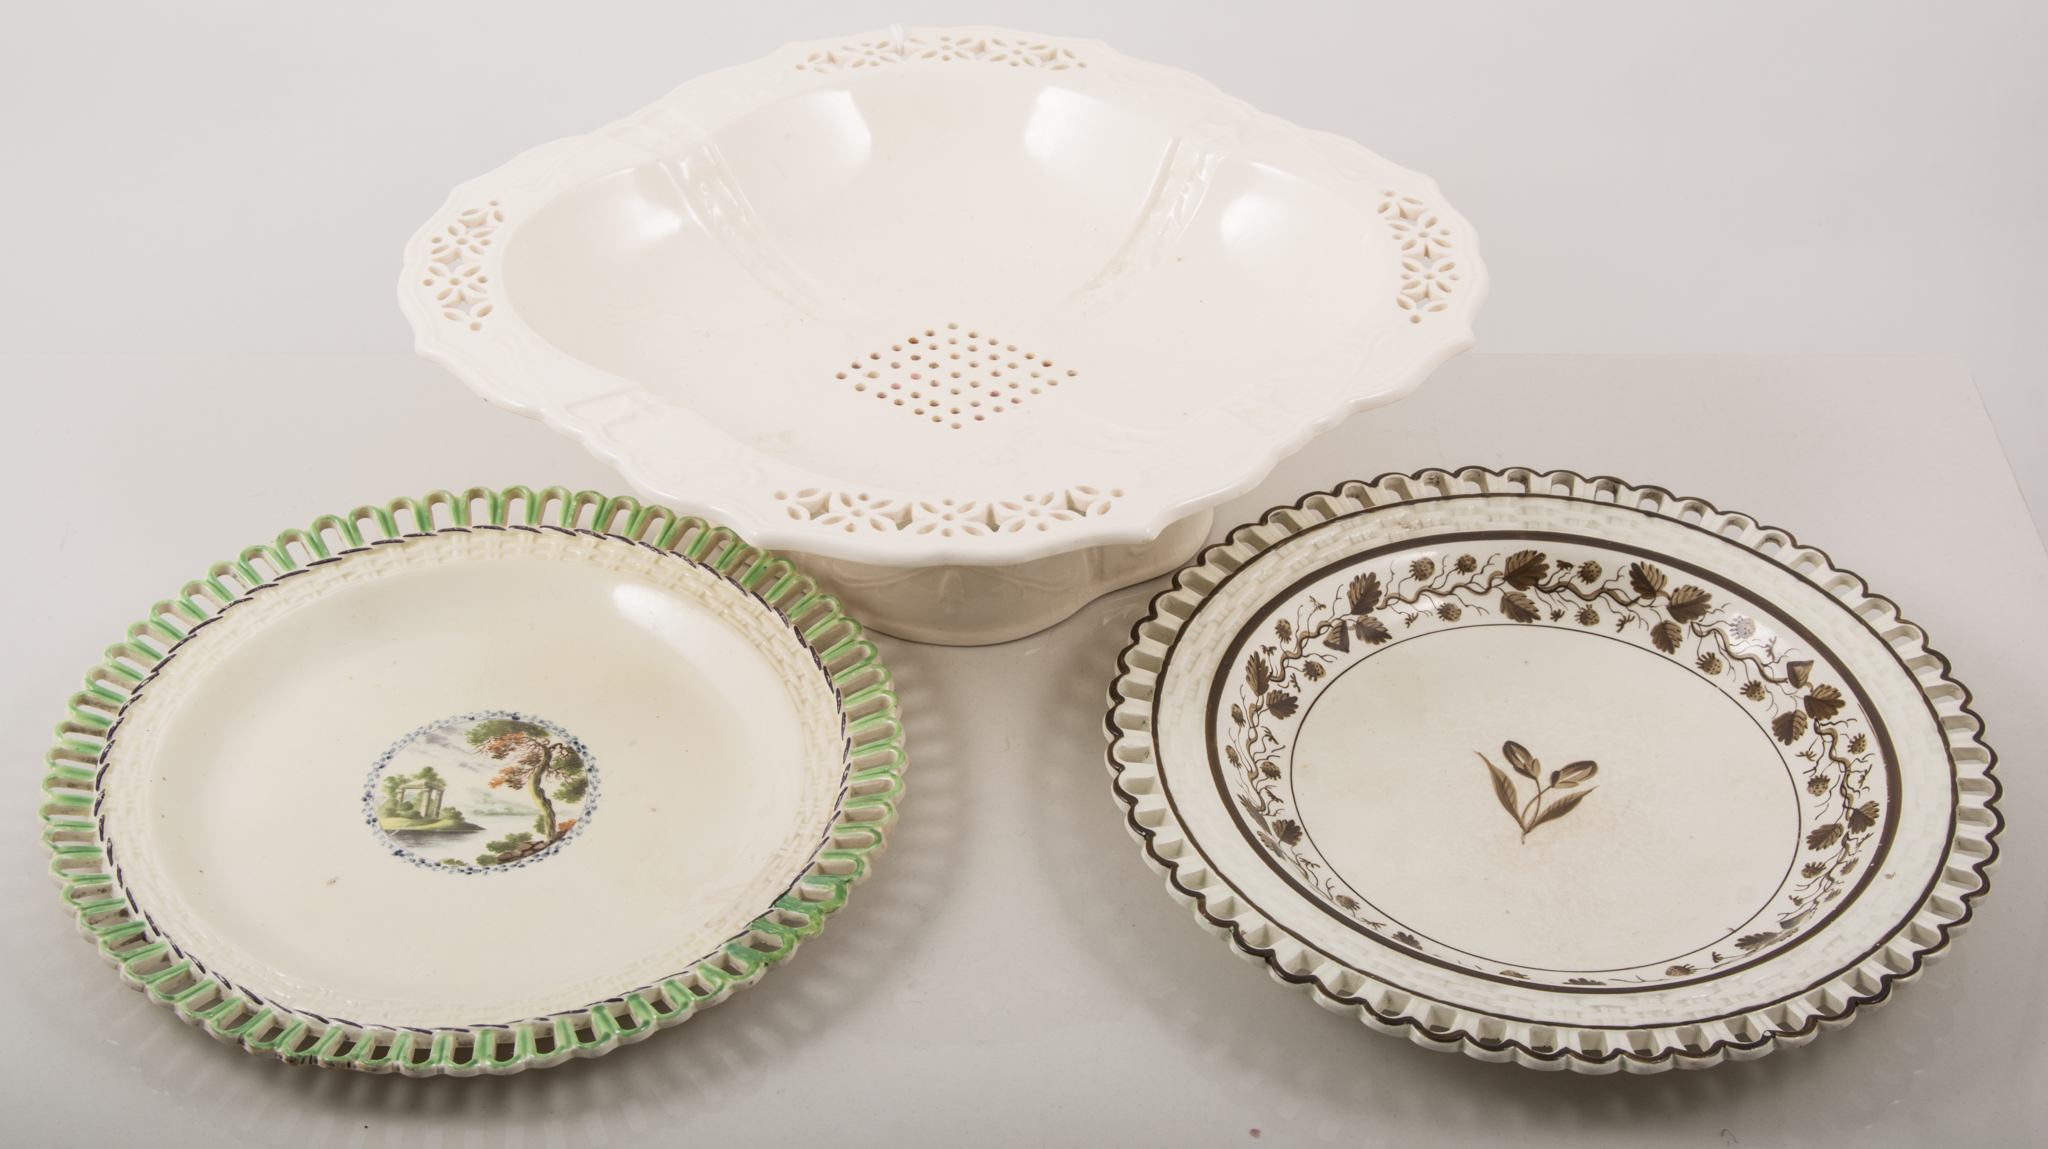 Small collection of Creamware, including pierced rimmed plate, dish, and pedestal dish,